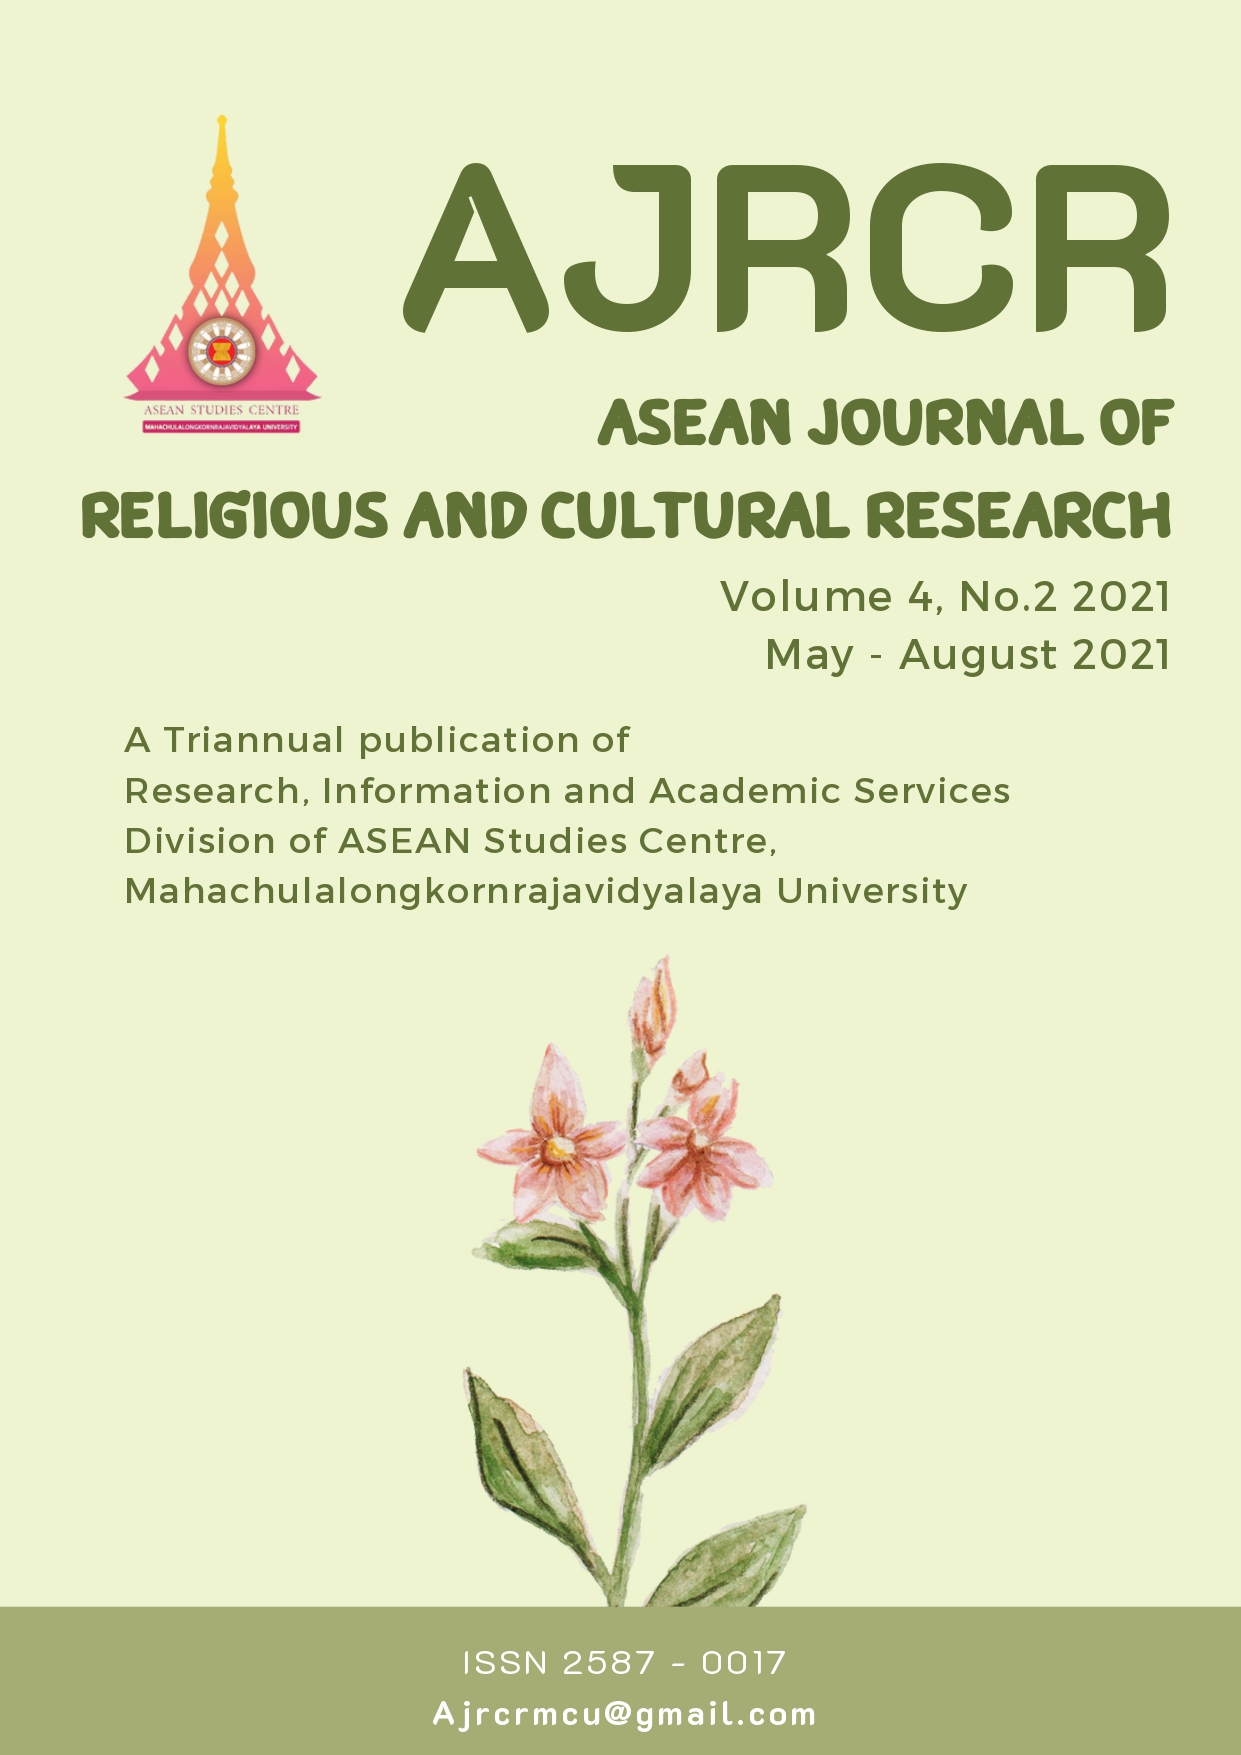 					View Vol. 4 No. 2 (2021): ASEAN Journal of Religious and Cultural Research (AJRCR)
				